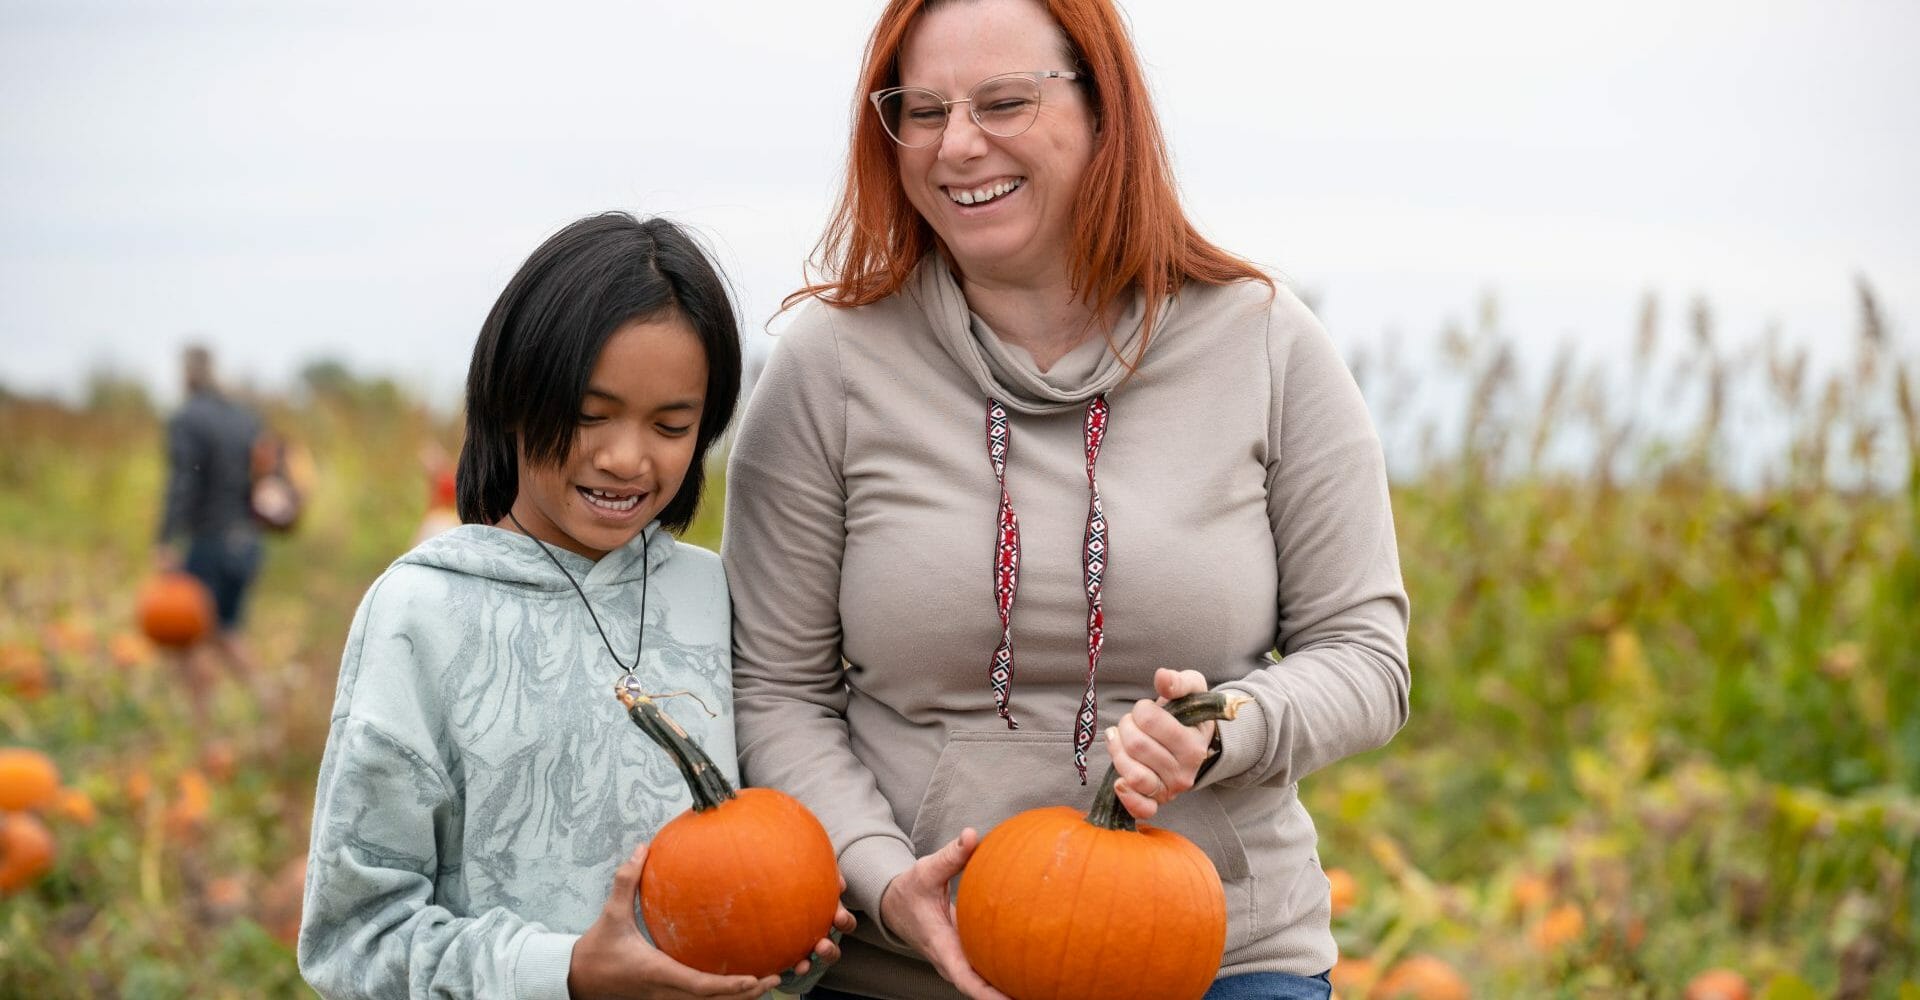 Where to pick your Halloween pumpkins?